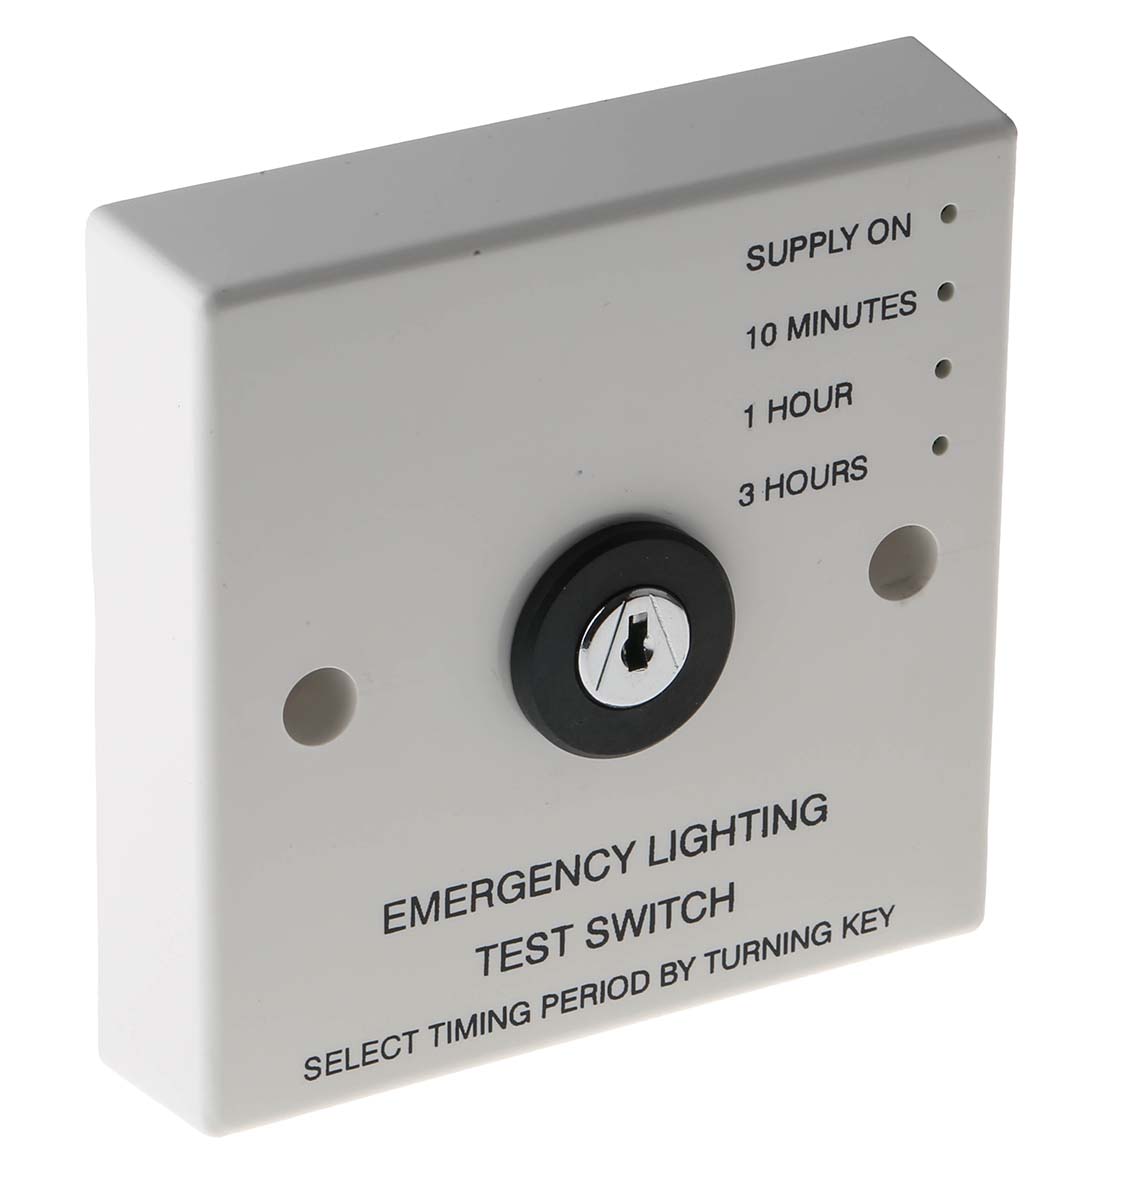 What are Light Switch Location Code Requirements - EricEstate